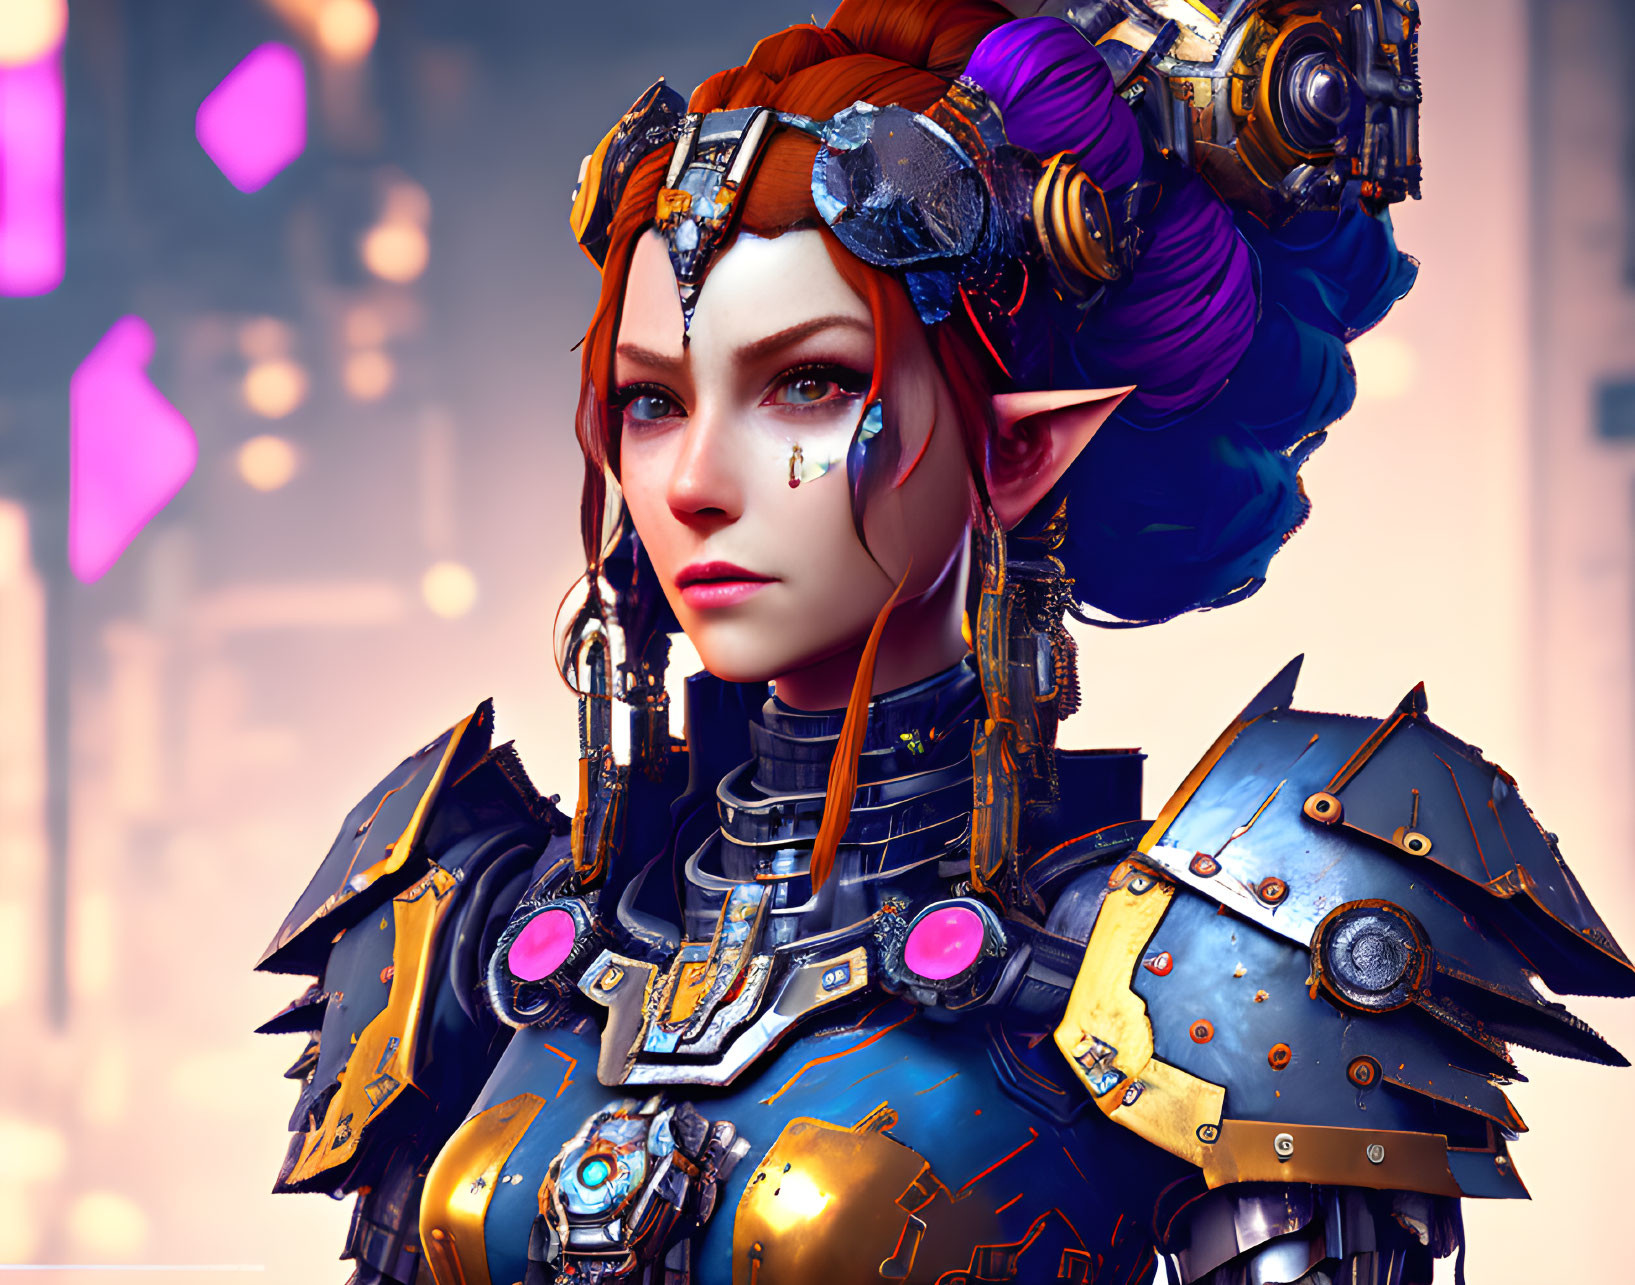 Fantasy female character with purple hair and futuristic armor